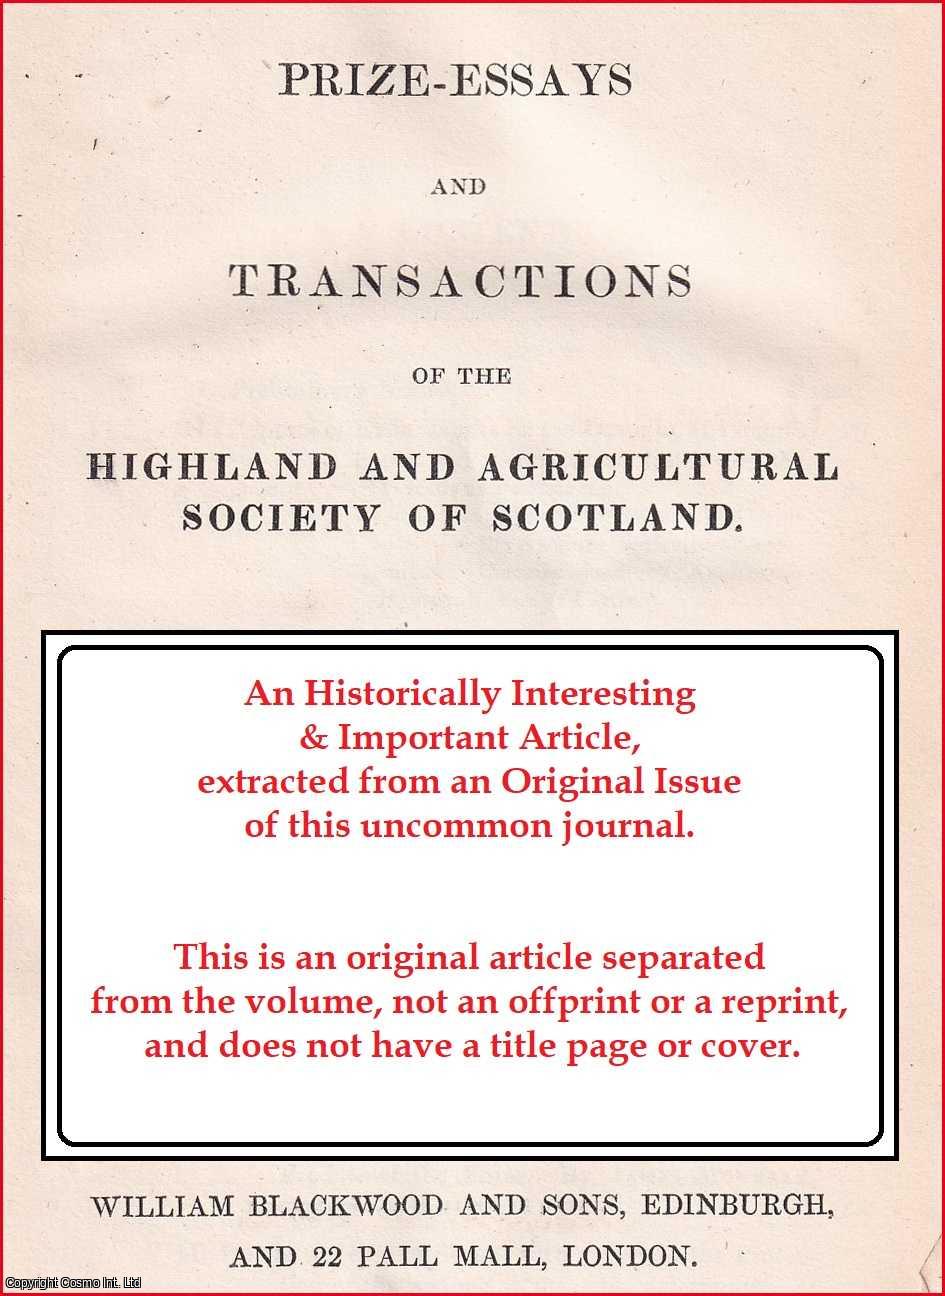 John Mowbray, Esq. - The Property of Muirs, in the Parish of Muckhart, County of Perth : the Improvement of Waste Land. An uncommon original article from the Prize Essays and Transactions of the Highland Society of Scotland, 1841.